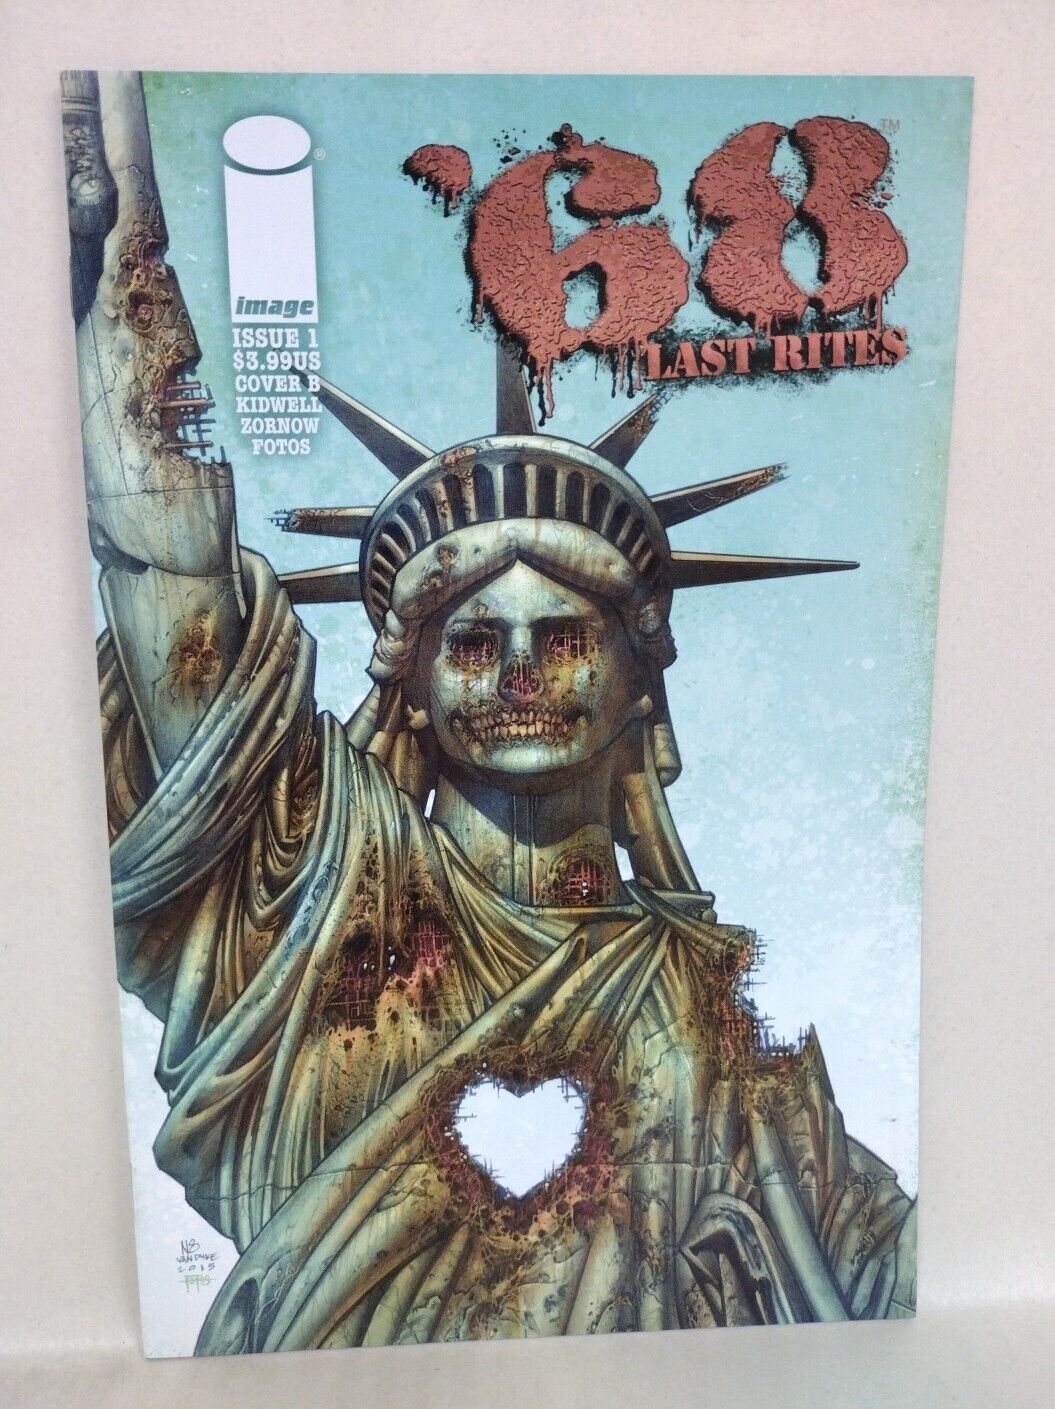 '68 Last Rights Complete 2016 Image Zombie Horror Comic Set #1 2a 2b 2 3 4 VF-NM